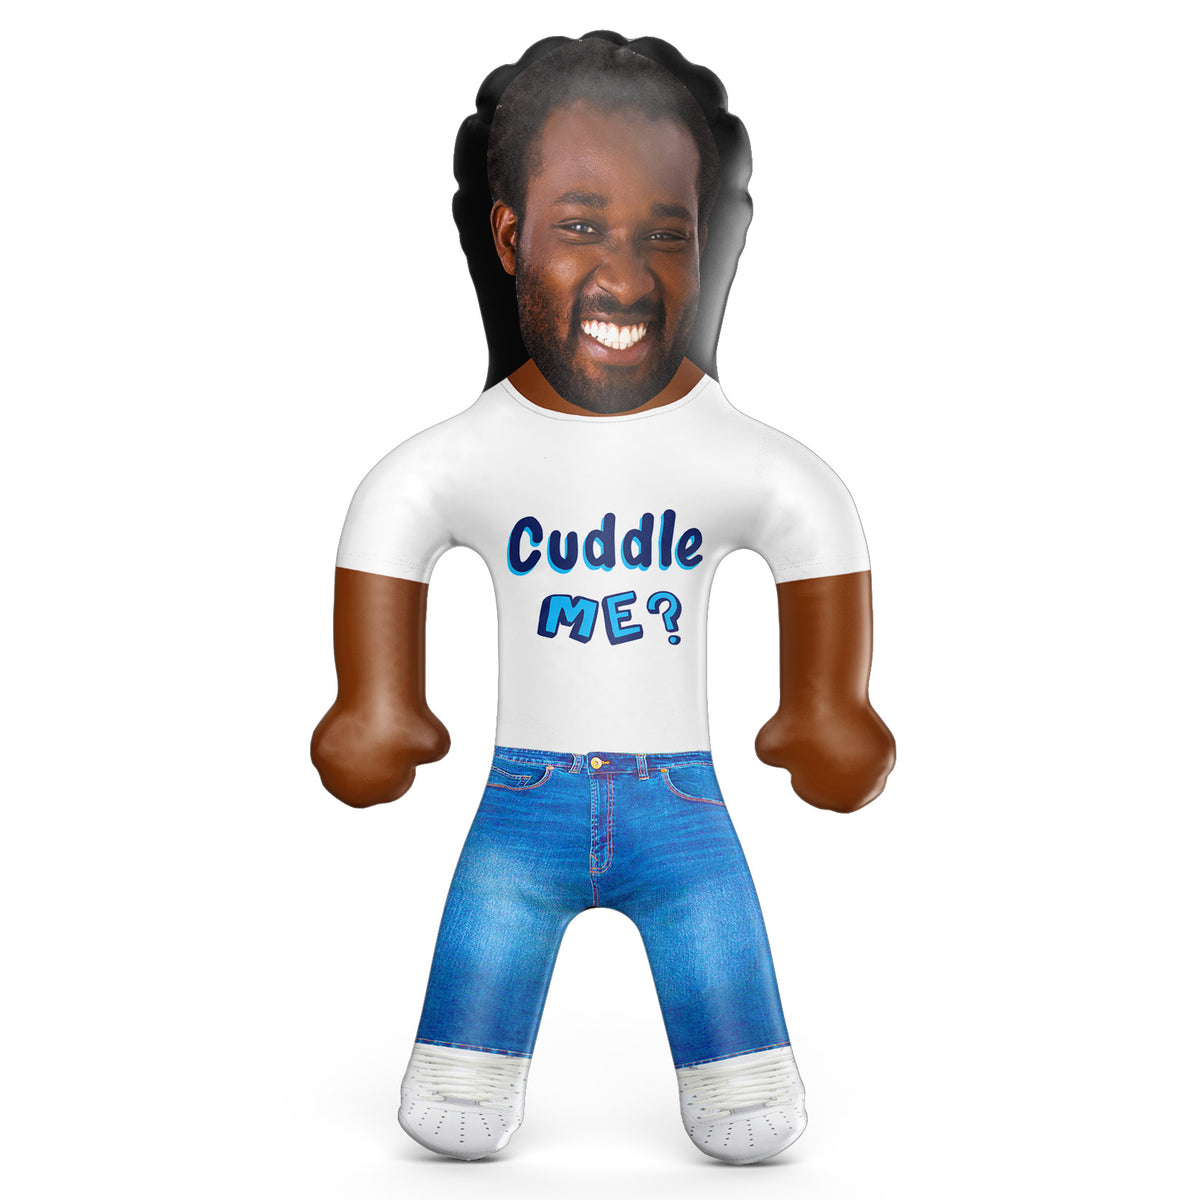  Cuddle Me Inflatable Doll - Cuddle Me Blow Up Doll